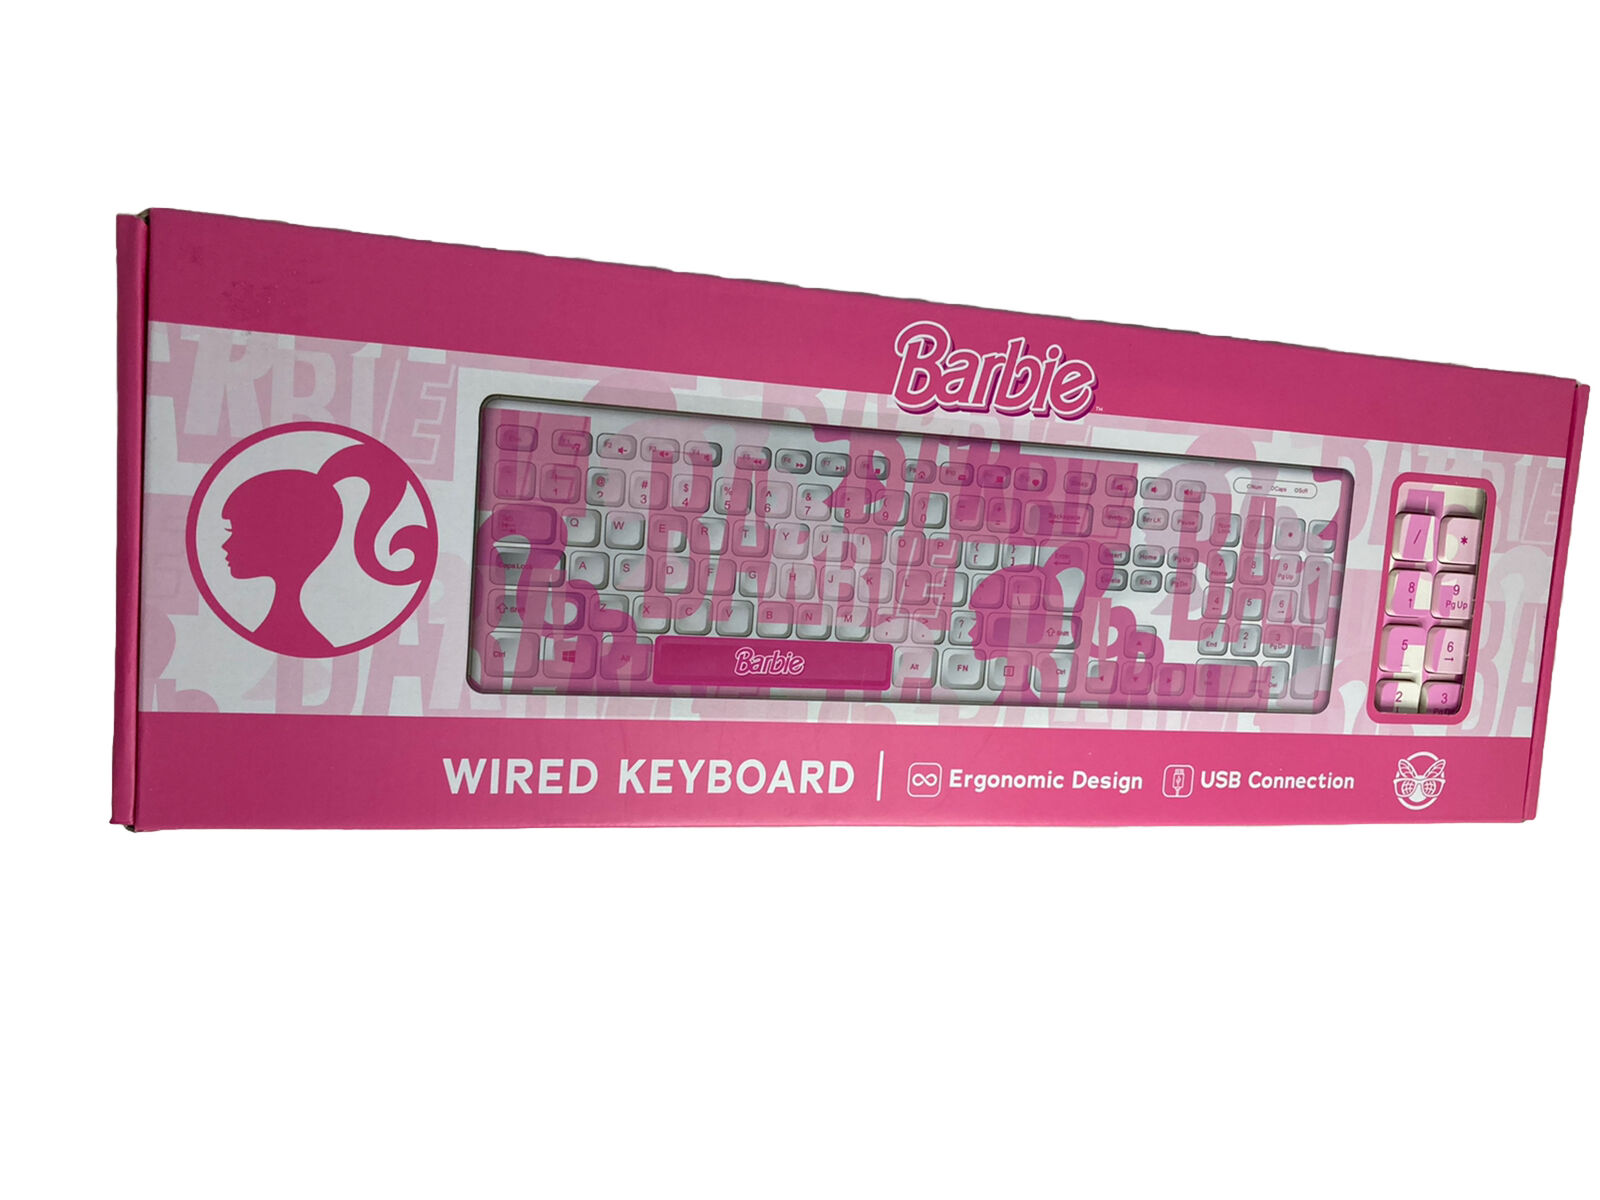 Barbie Wired USB PC Keyboard Brand New Mattel 2023 UBS Connection 108 Keys Pink